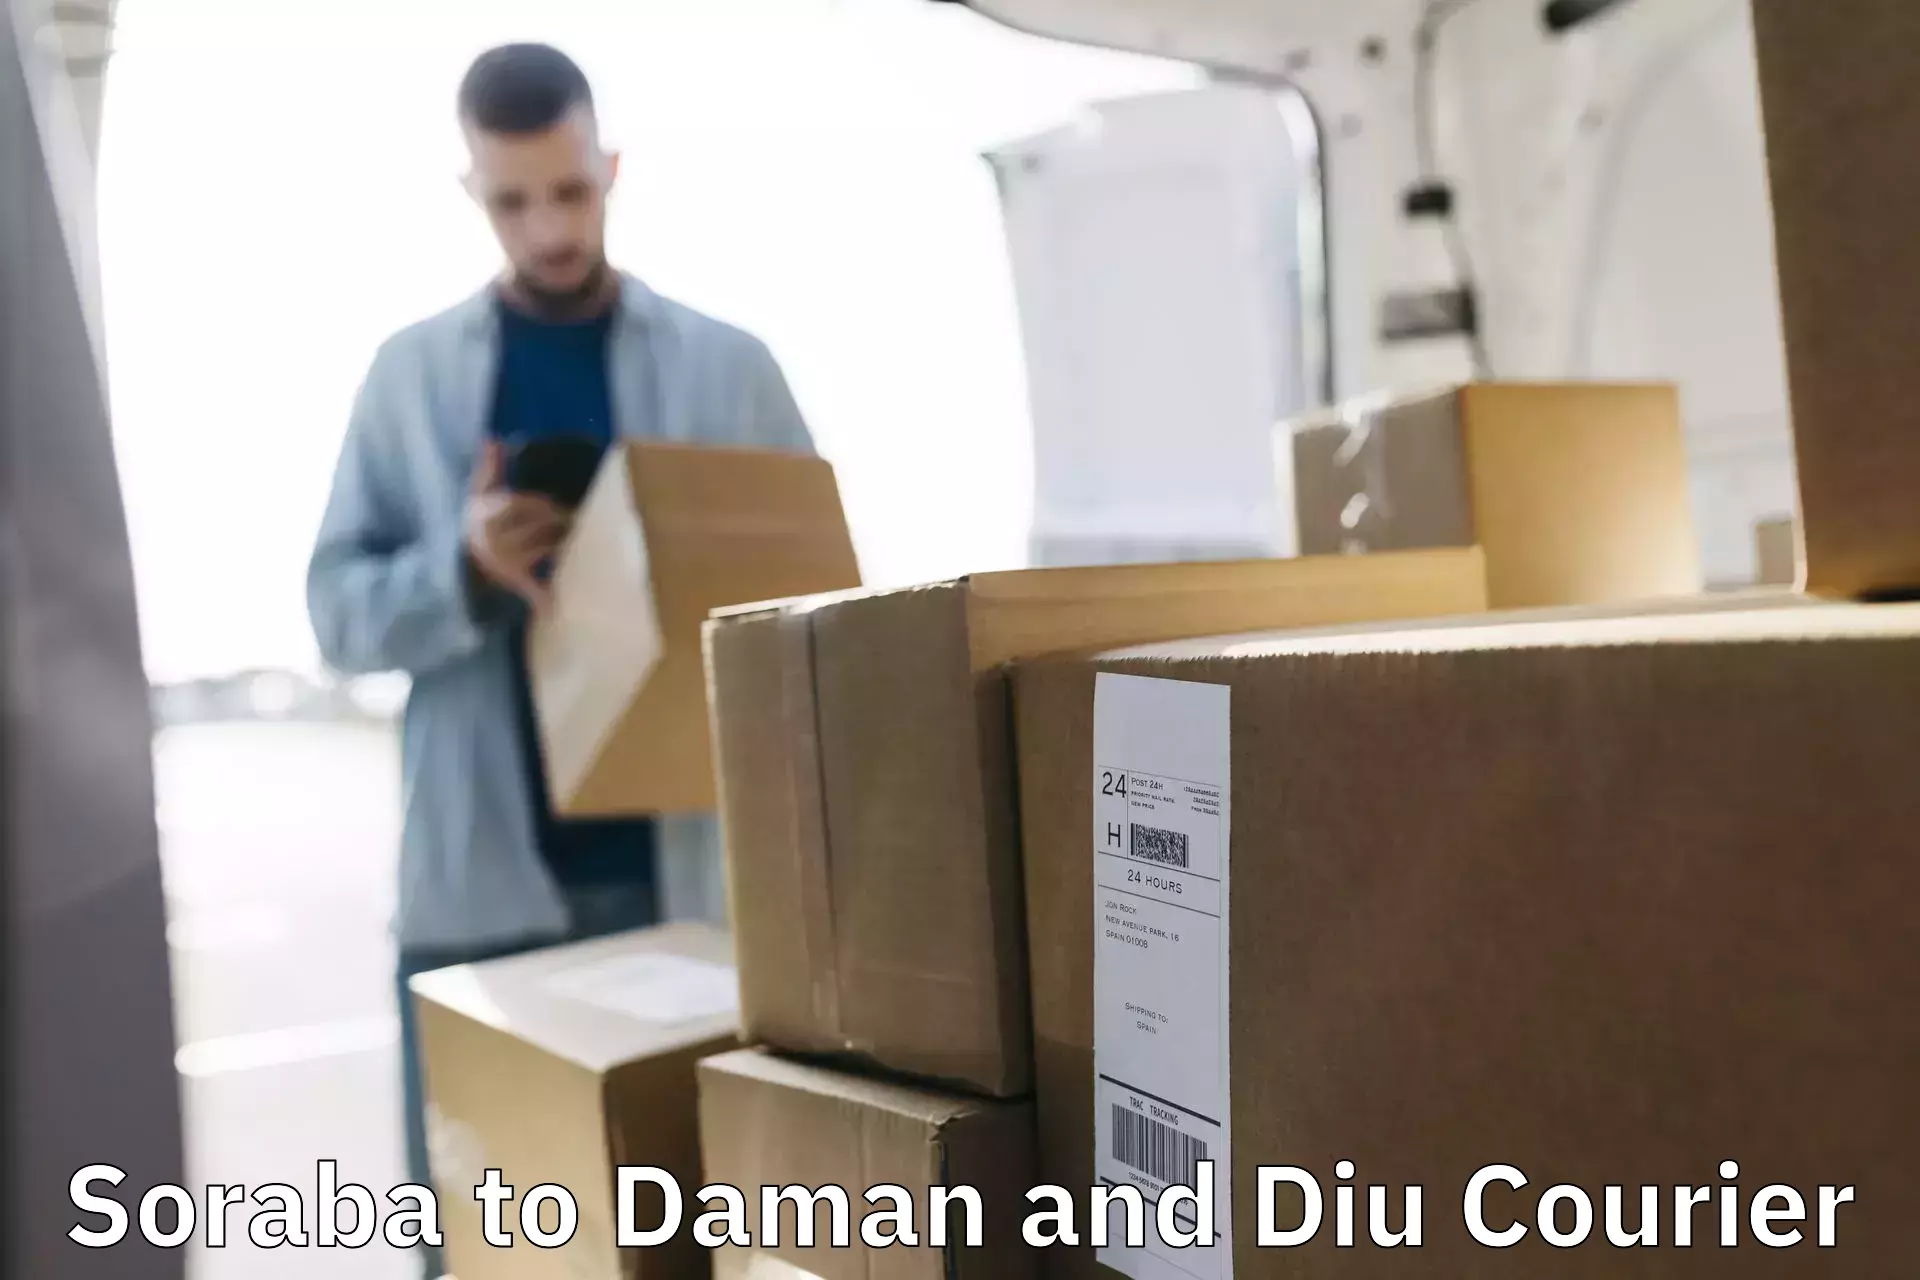 Next-day delivery options Soraba to Diu